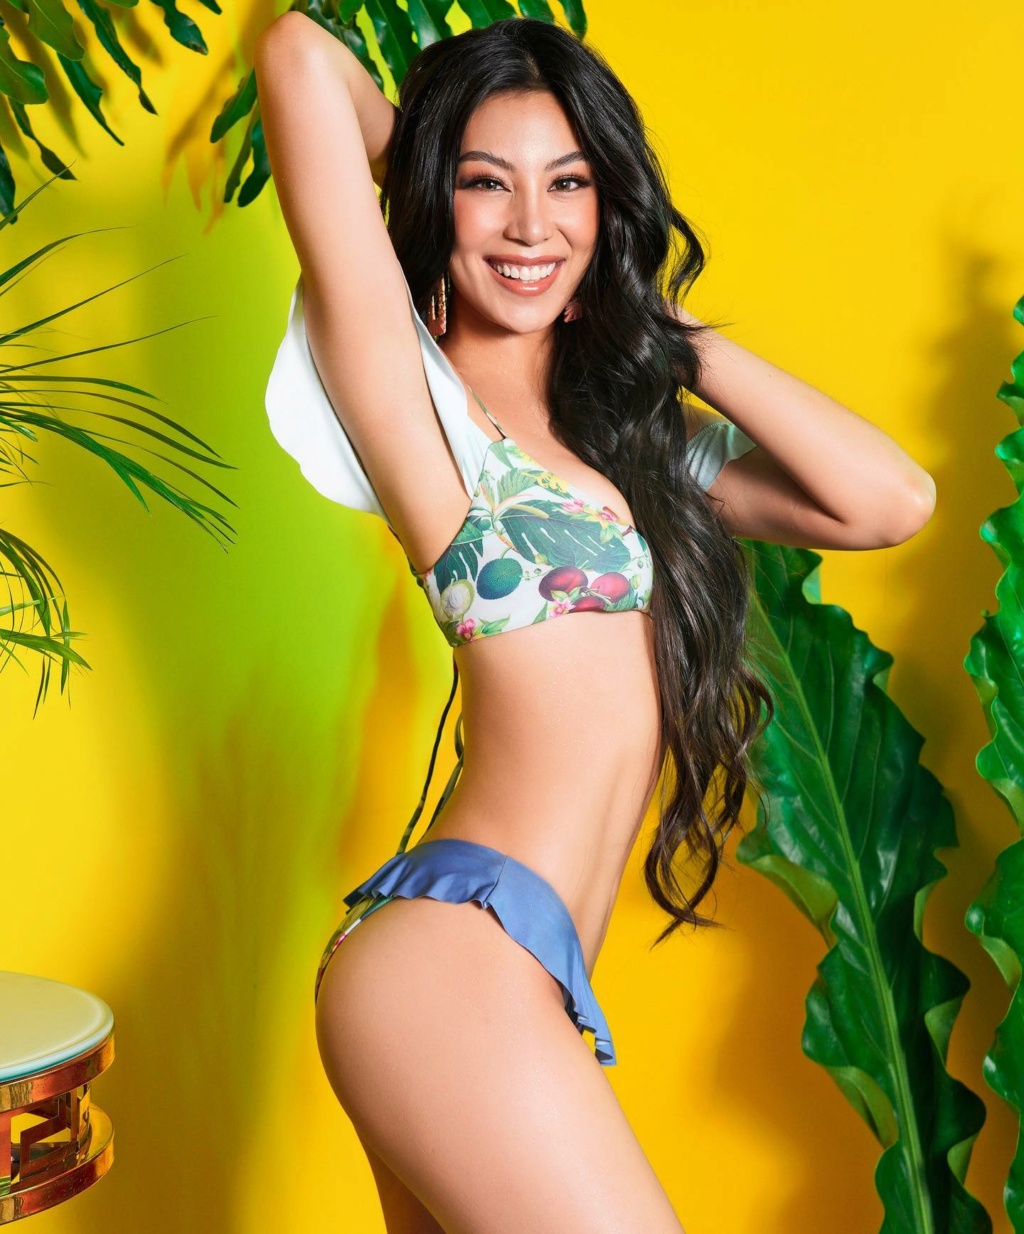 Miss World Philippines 2021 @ Official Swimsuit Photos 21882410